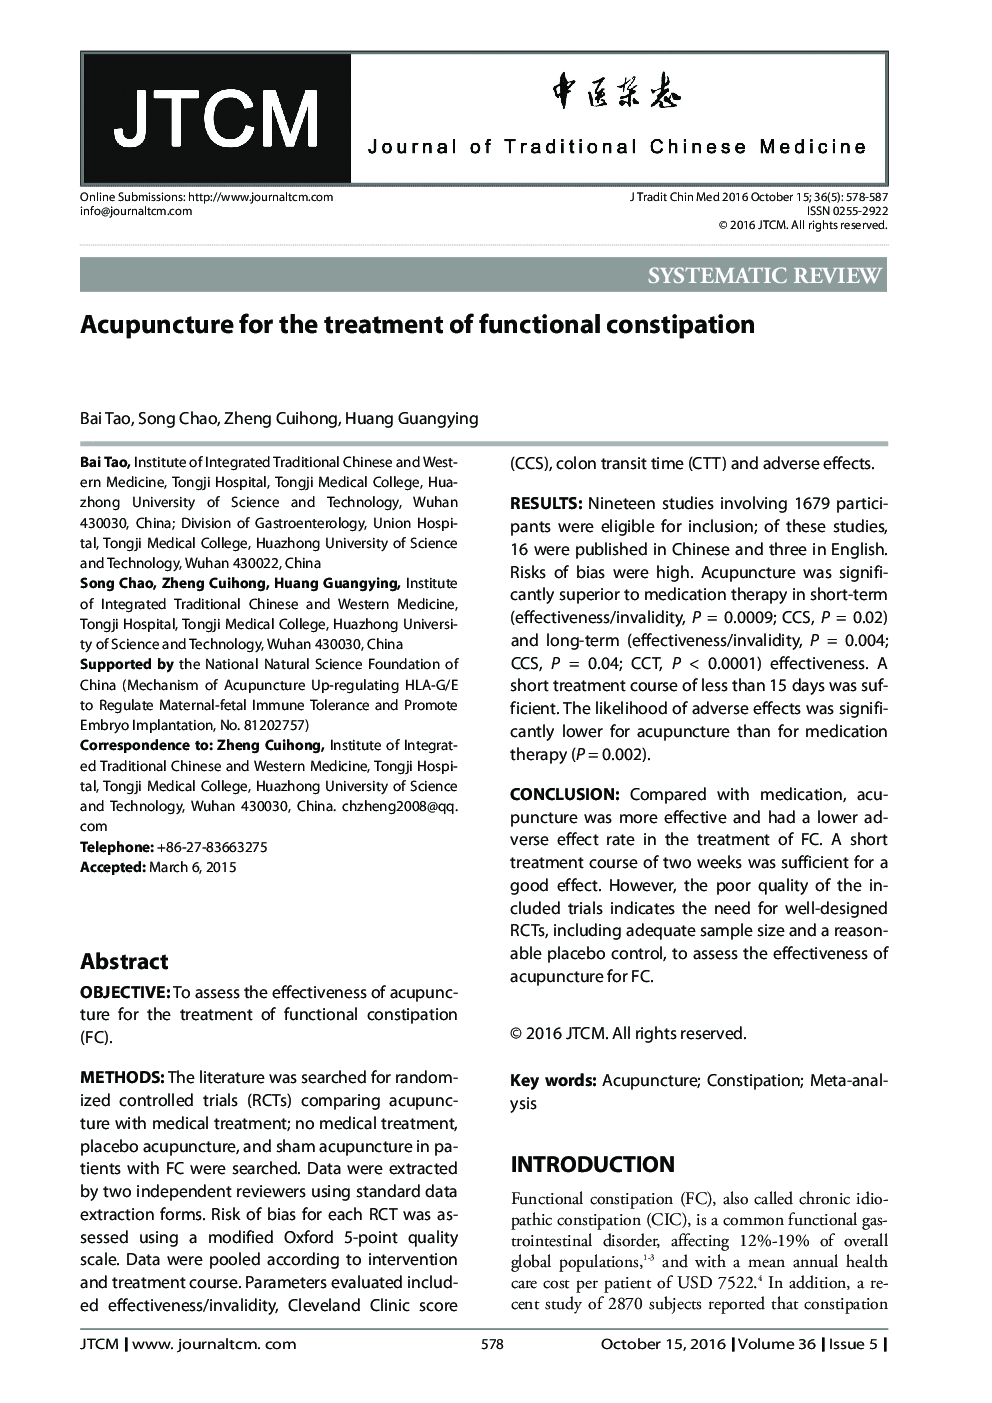 Acupuncture for the treatment of functional constipation